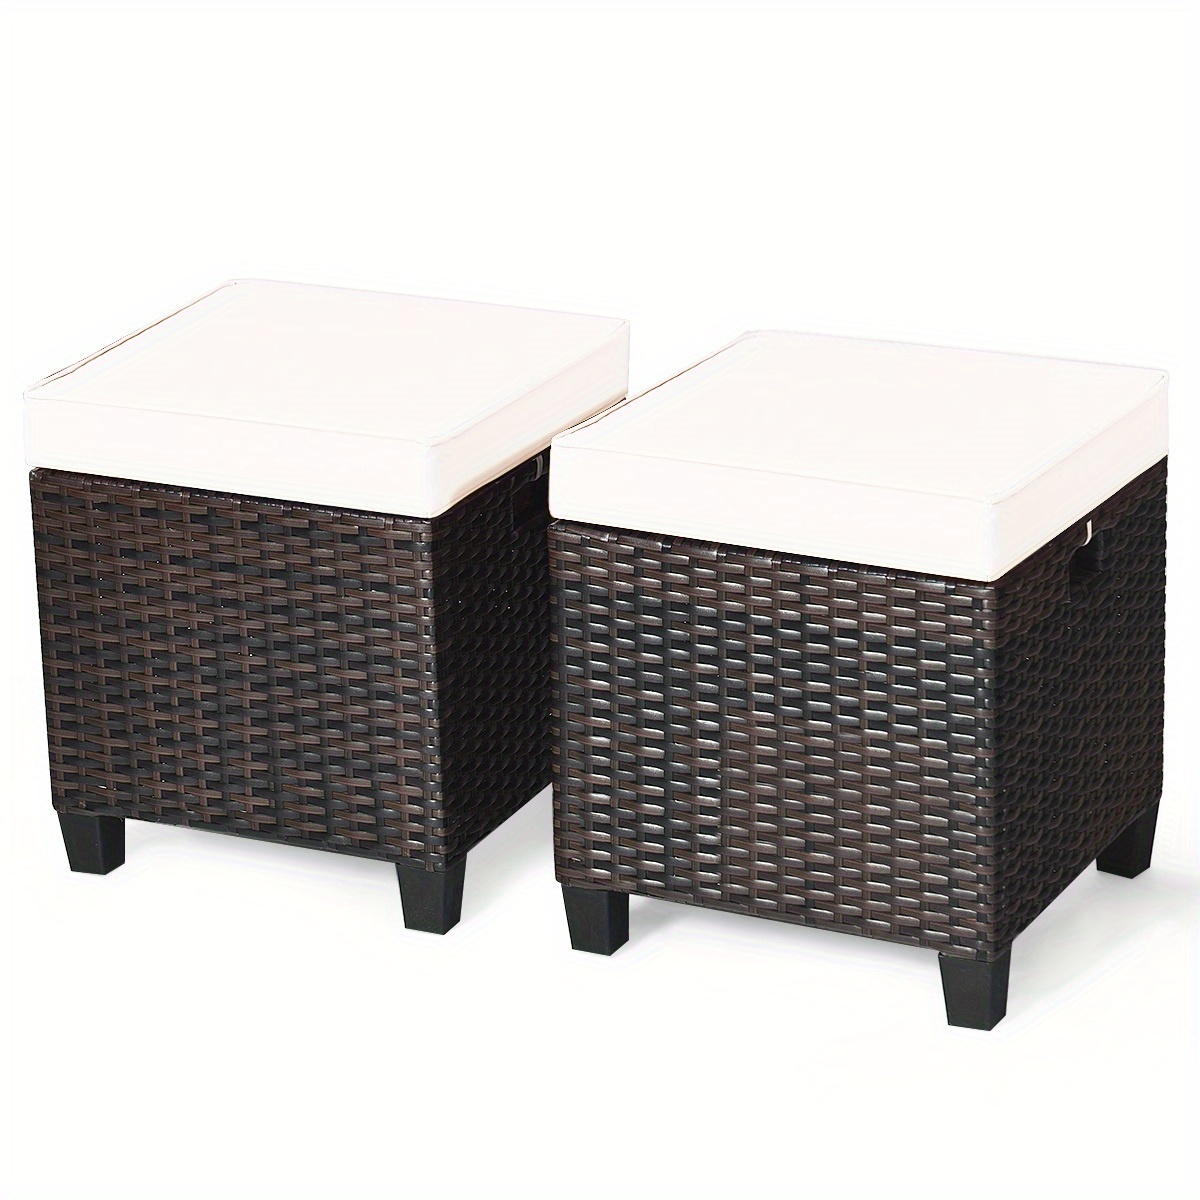 

Homasis 2pcs Patio Rattan Ottoman Cushioned Seat Foot Rest Coffee Table Furniture Beige